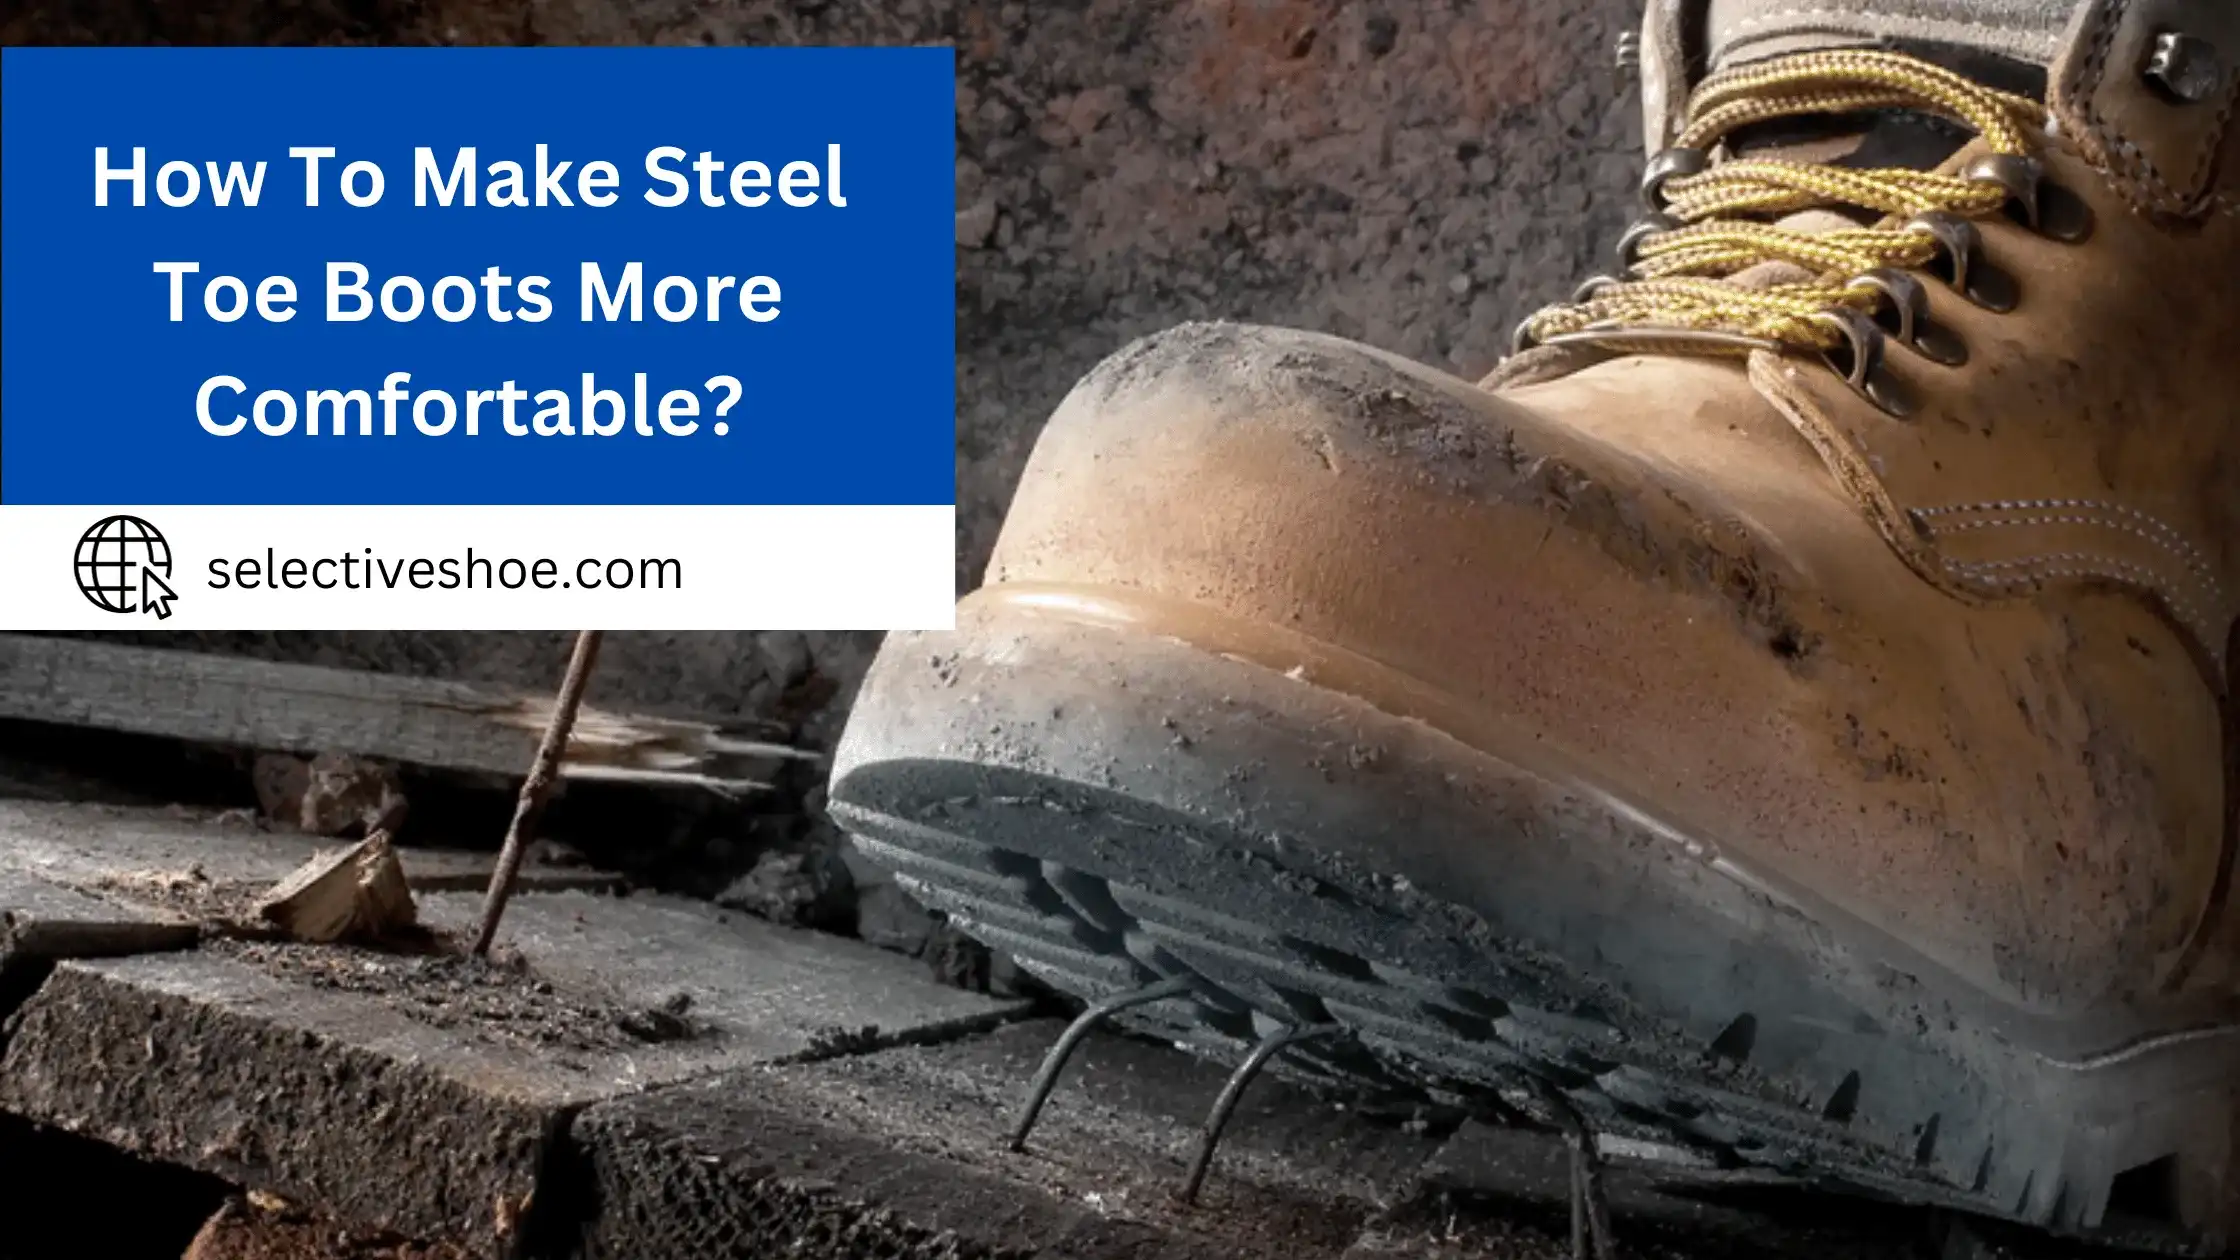 How To Make Steel Toe Boots More Comfortable? Quick Solutions!